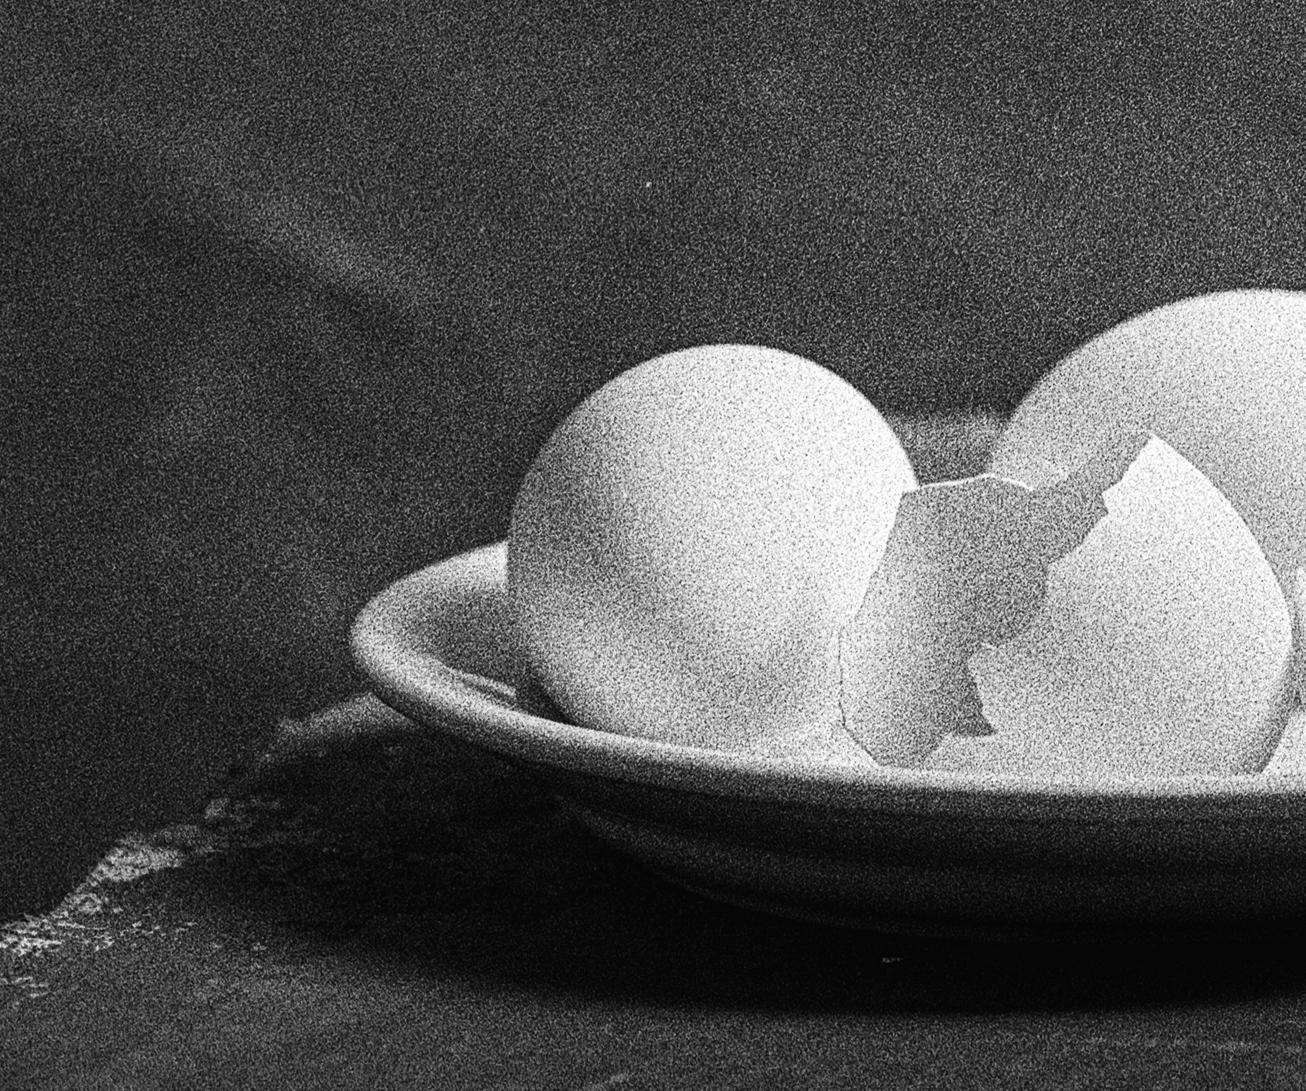 Egg Study 5, 2021 by Shine Huang
Silver gelatin print on Ilford Fiber Paper.
Image size: 20 in. H x 16 in. W
Edition 1/9

Signed on verso in ink.
unframed
____________________________
Shine Huang (M.F.A. Photography) is a Chinese-born photographer